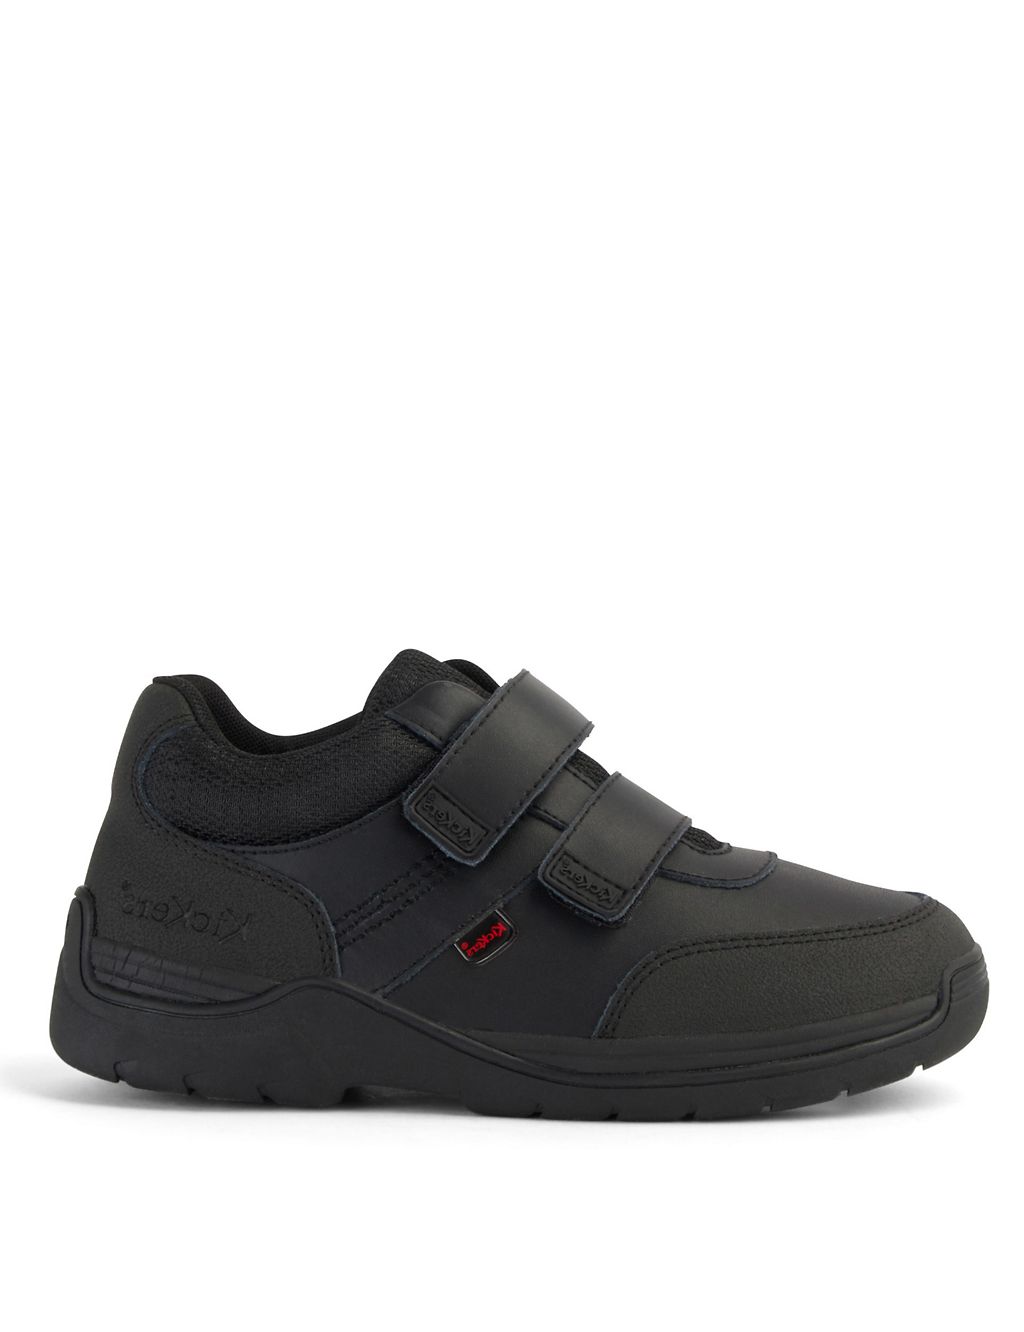 Kids' Leather Riptape School Shoes 3 of 6